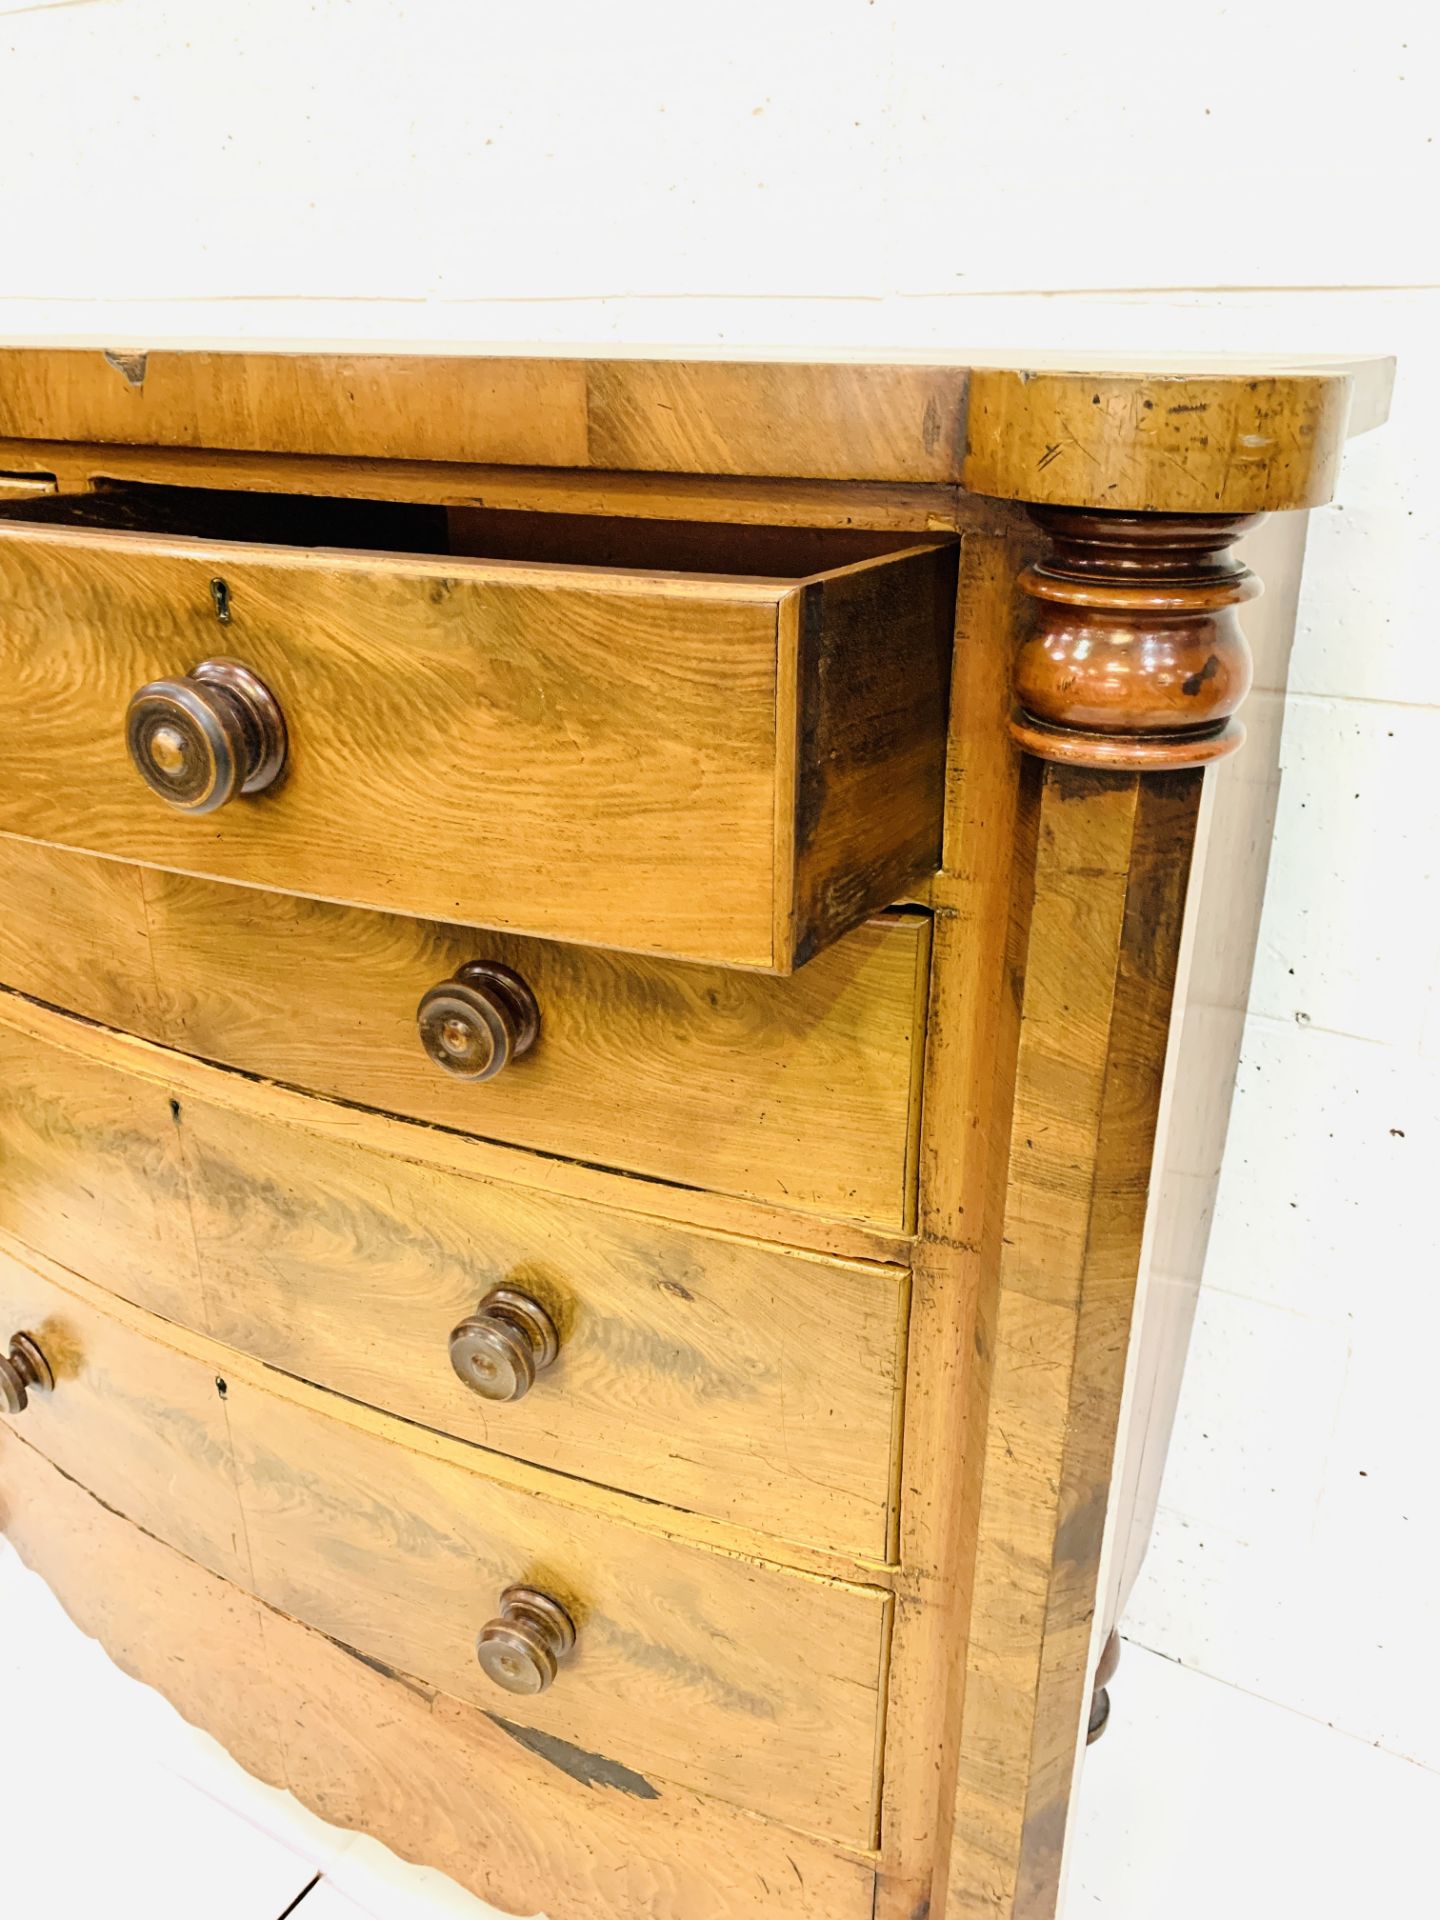 Victorian mahogany veneer Scotch chest of drawers - Image 5 of 8